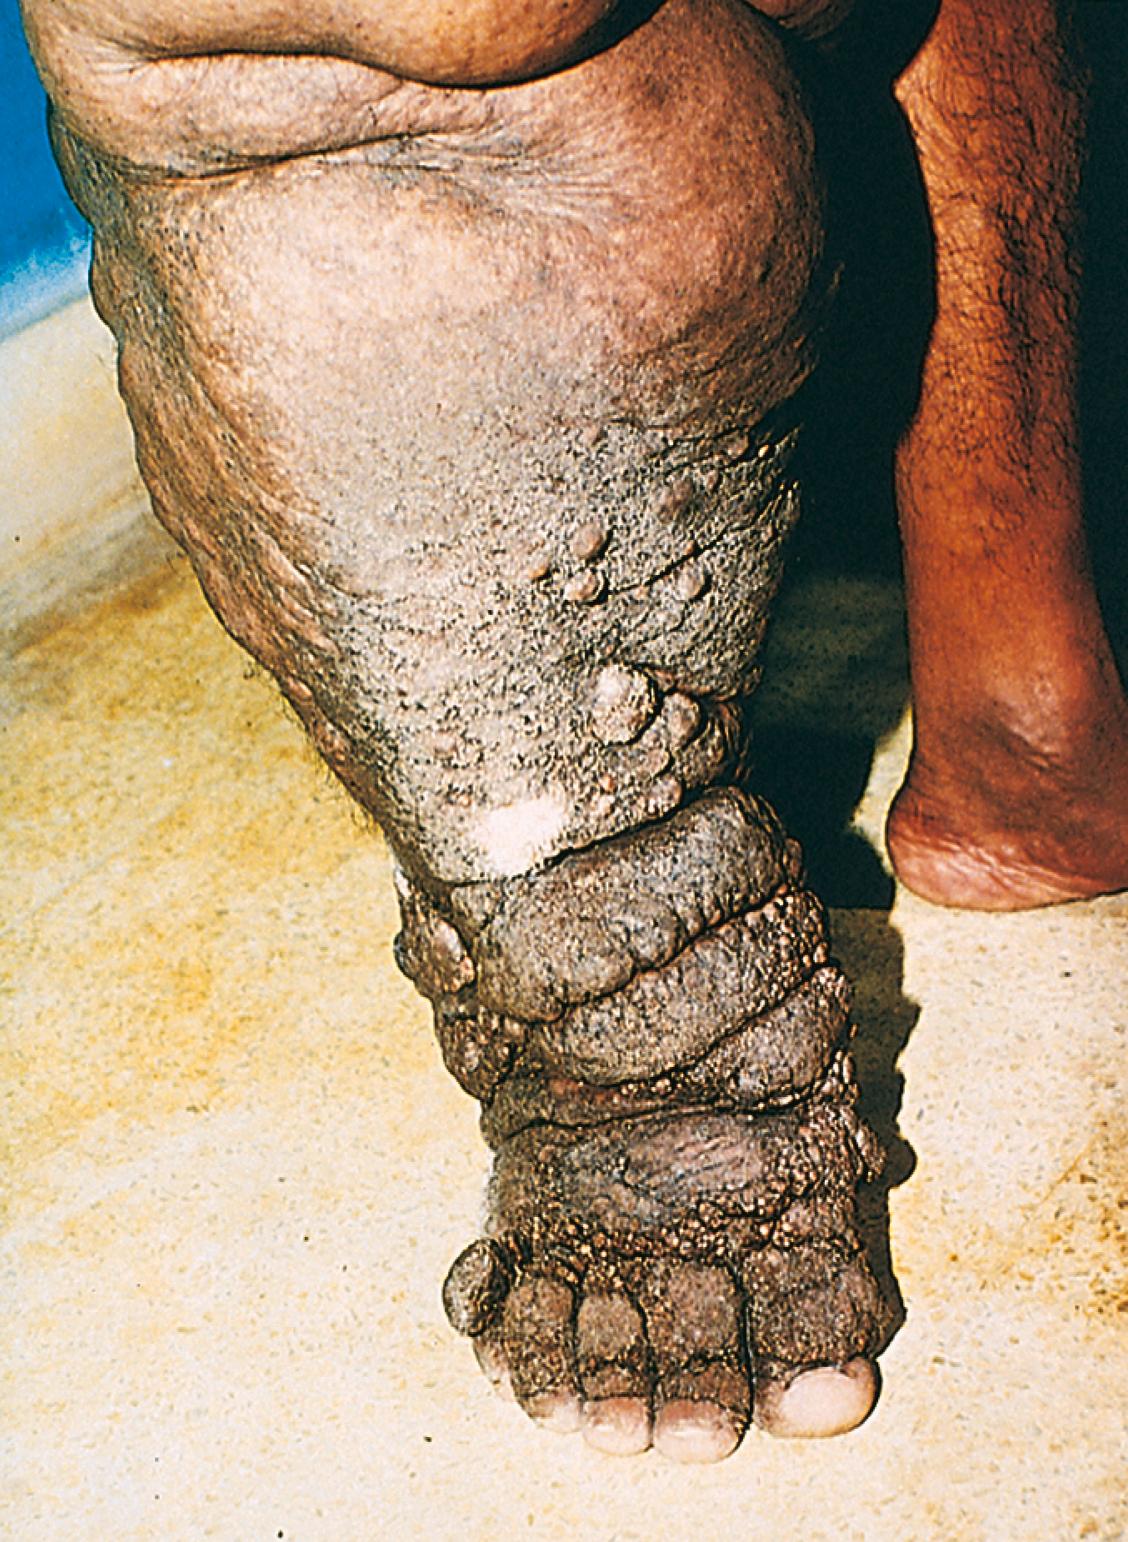 eFIG. 3.2, Massive edema and elephantiasis caused by filariasis of the leg.